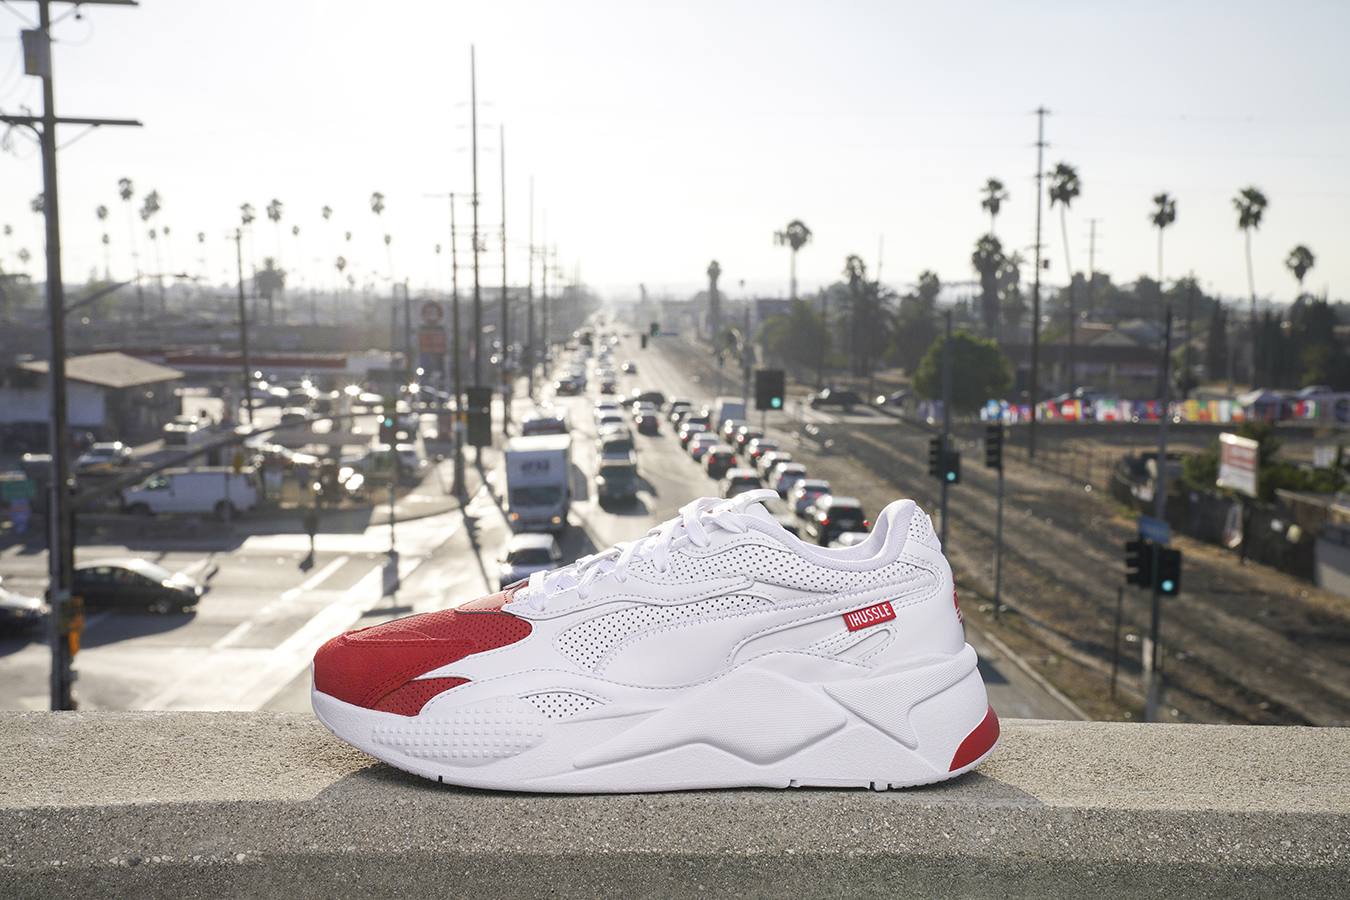 The Marathon Clothing x PUMA Collection Re-Release